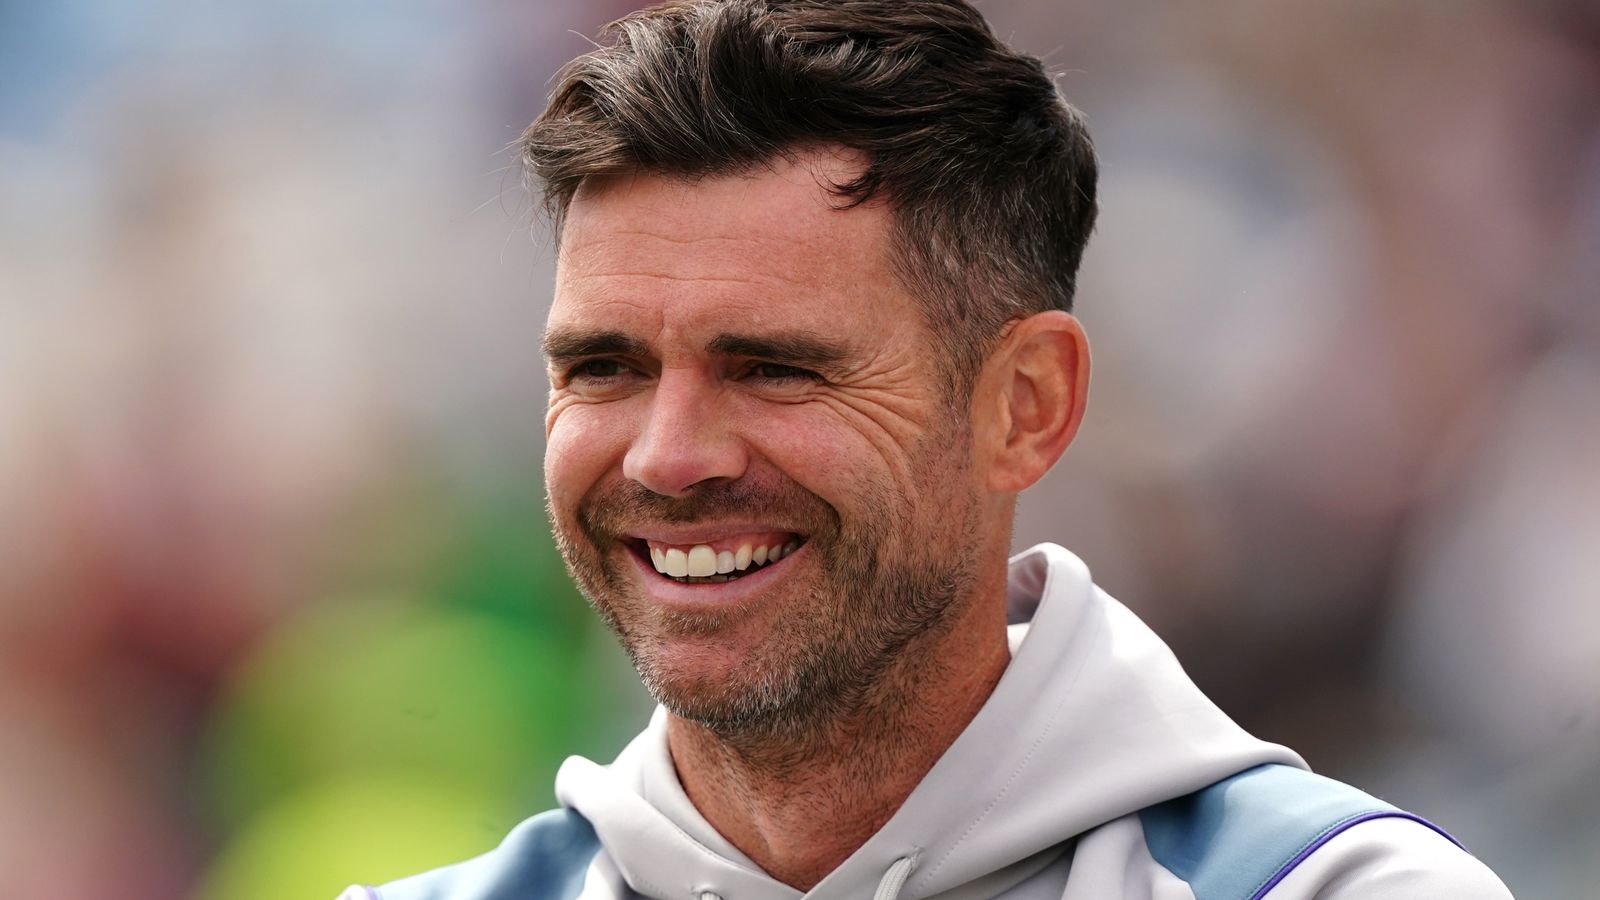 James Anderson returns to England team for India Test as Jamie Overton drops out | Cricket News